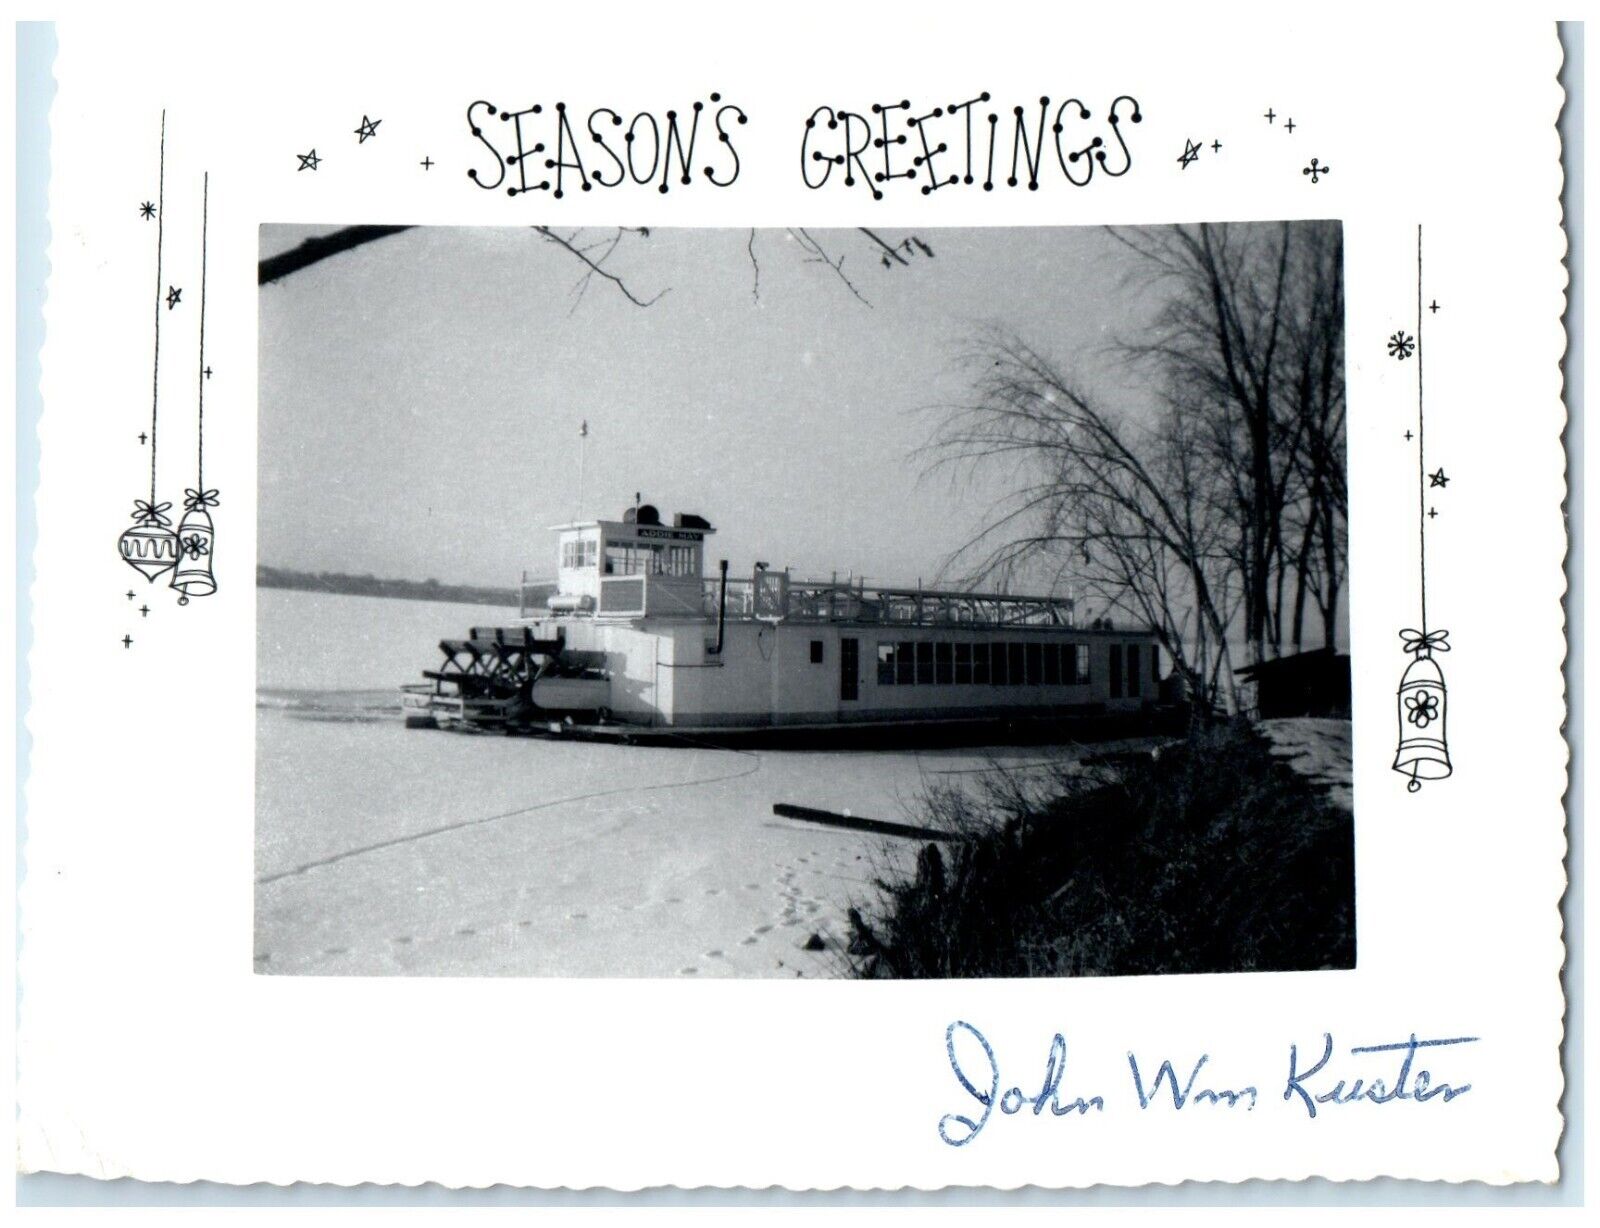 Excursion Boat Addie May South Of Nauvoo Illinois IL Season\'s Greetings Postcard